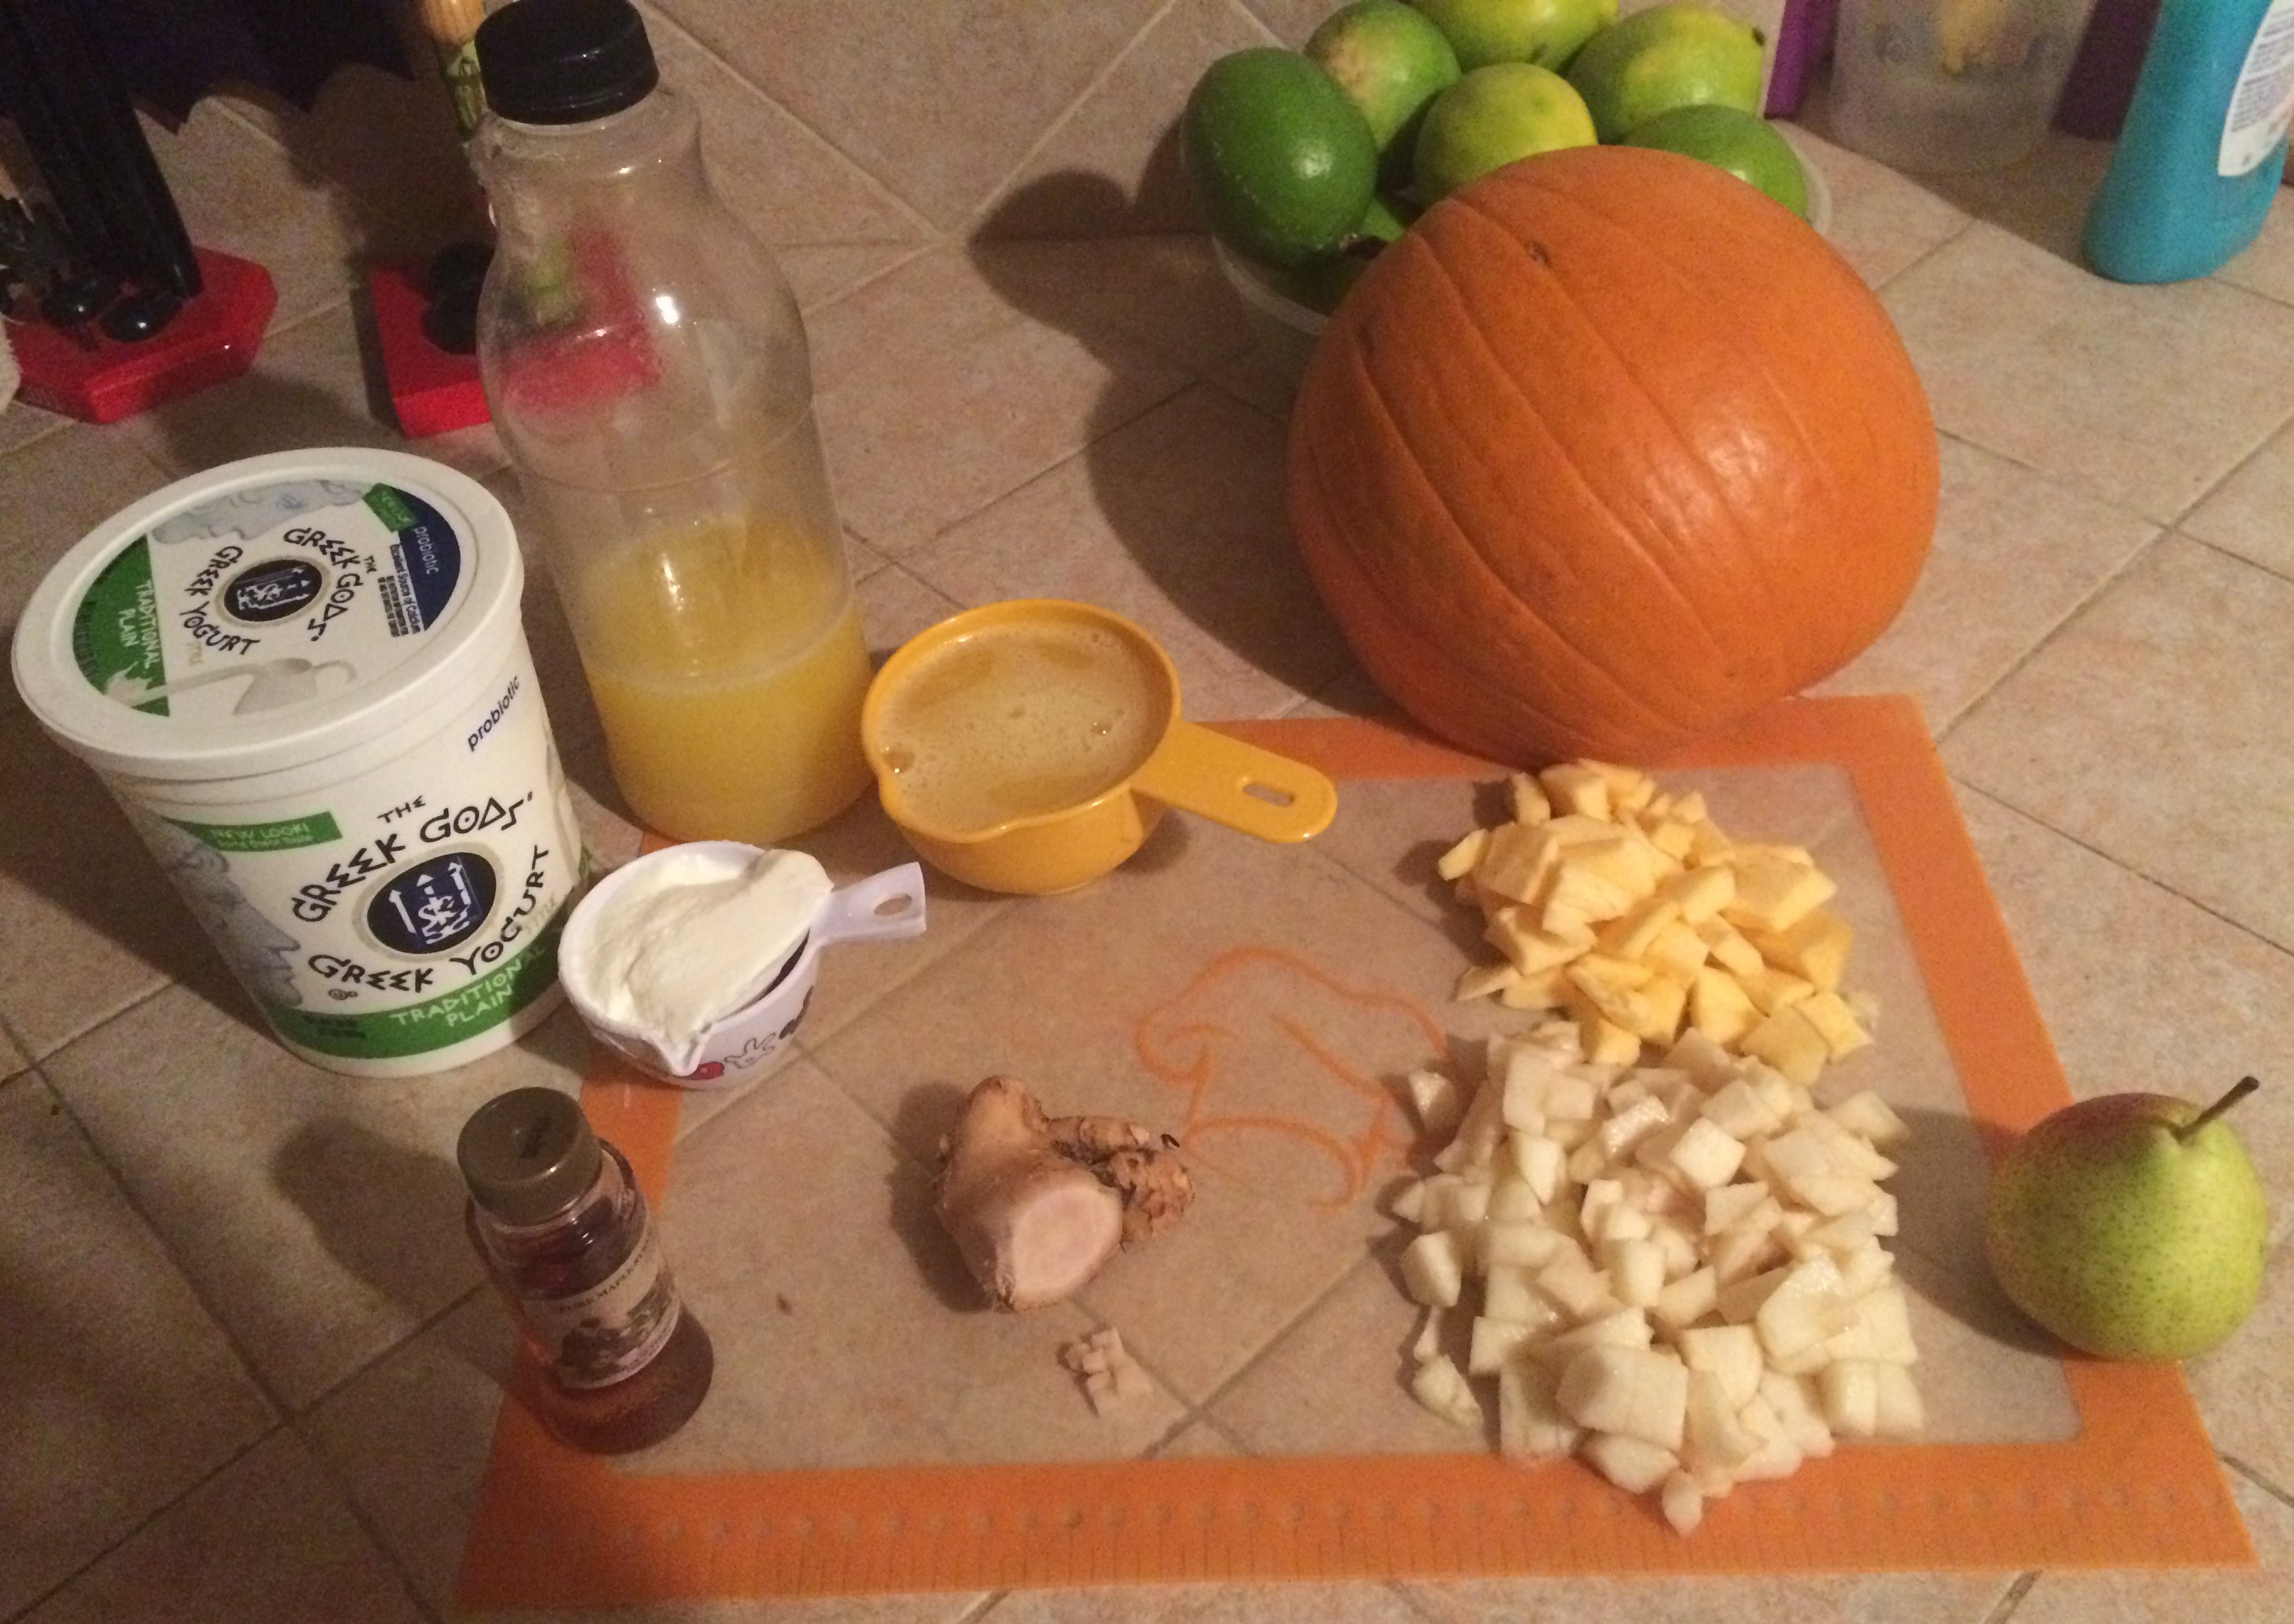 This one was made with pumpkin, ginger, pear, maple syrup, fresh orange juice, and yogurt.